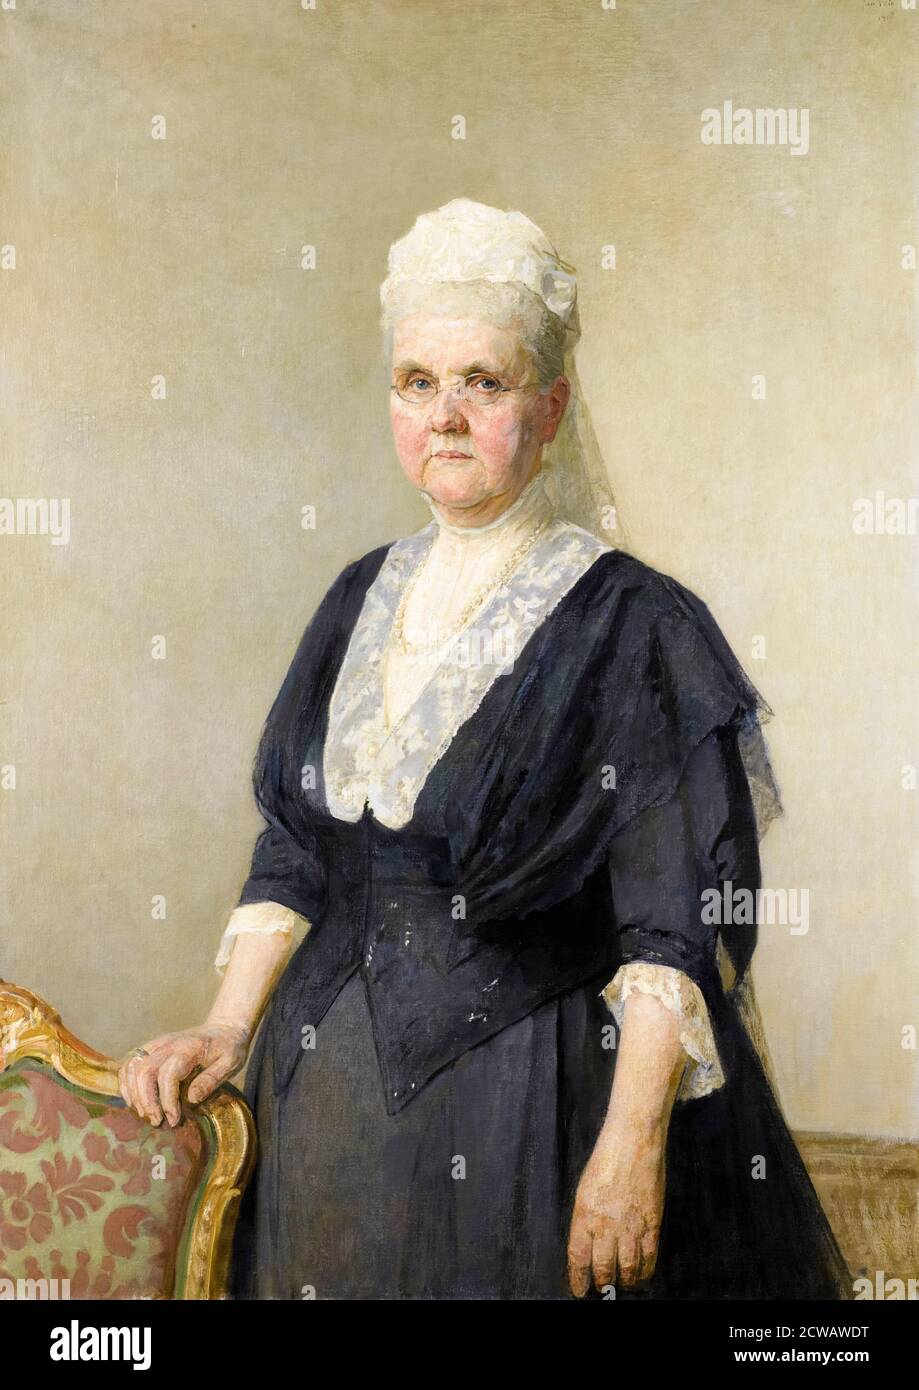 Emma of Waldeck and Pyrmont (1858-1934), Queen Consort of the Netherlands, portrait painting by Jan Veth, 1918 Stock Photo